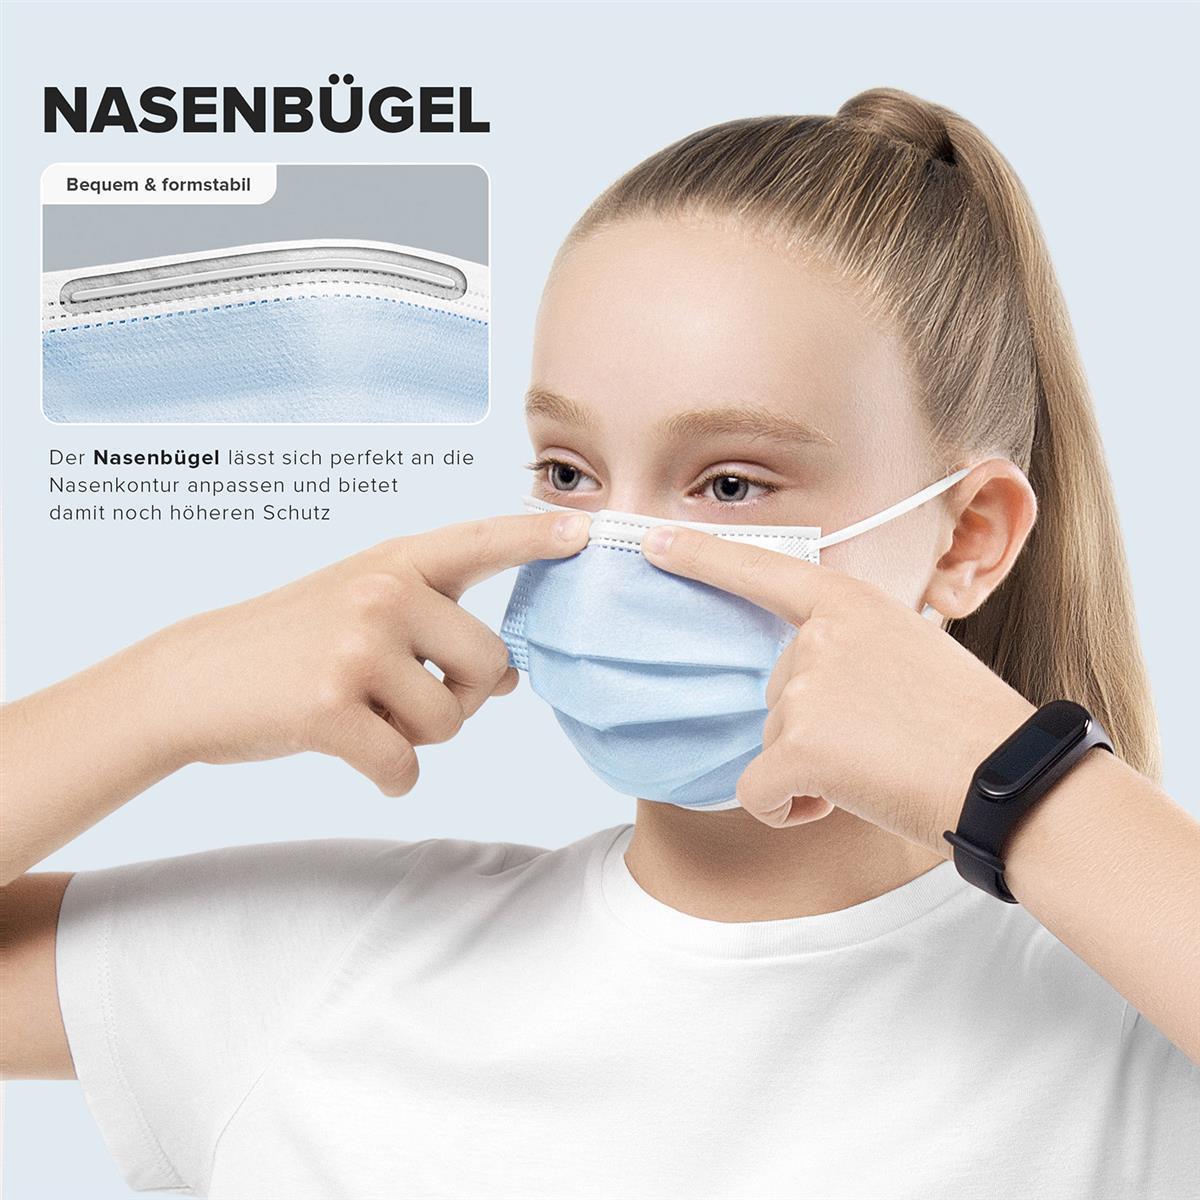 50X HARD® MEDICAL FACE MASK FOR CHILDREN
SURGICAL MASK TYPE IIR
IN SMALL SIZE XS
STANDARD 100 BY OEKO-TEX
MADE IN GERMANY
NOT INDIVIDUALLY PACKAGED